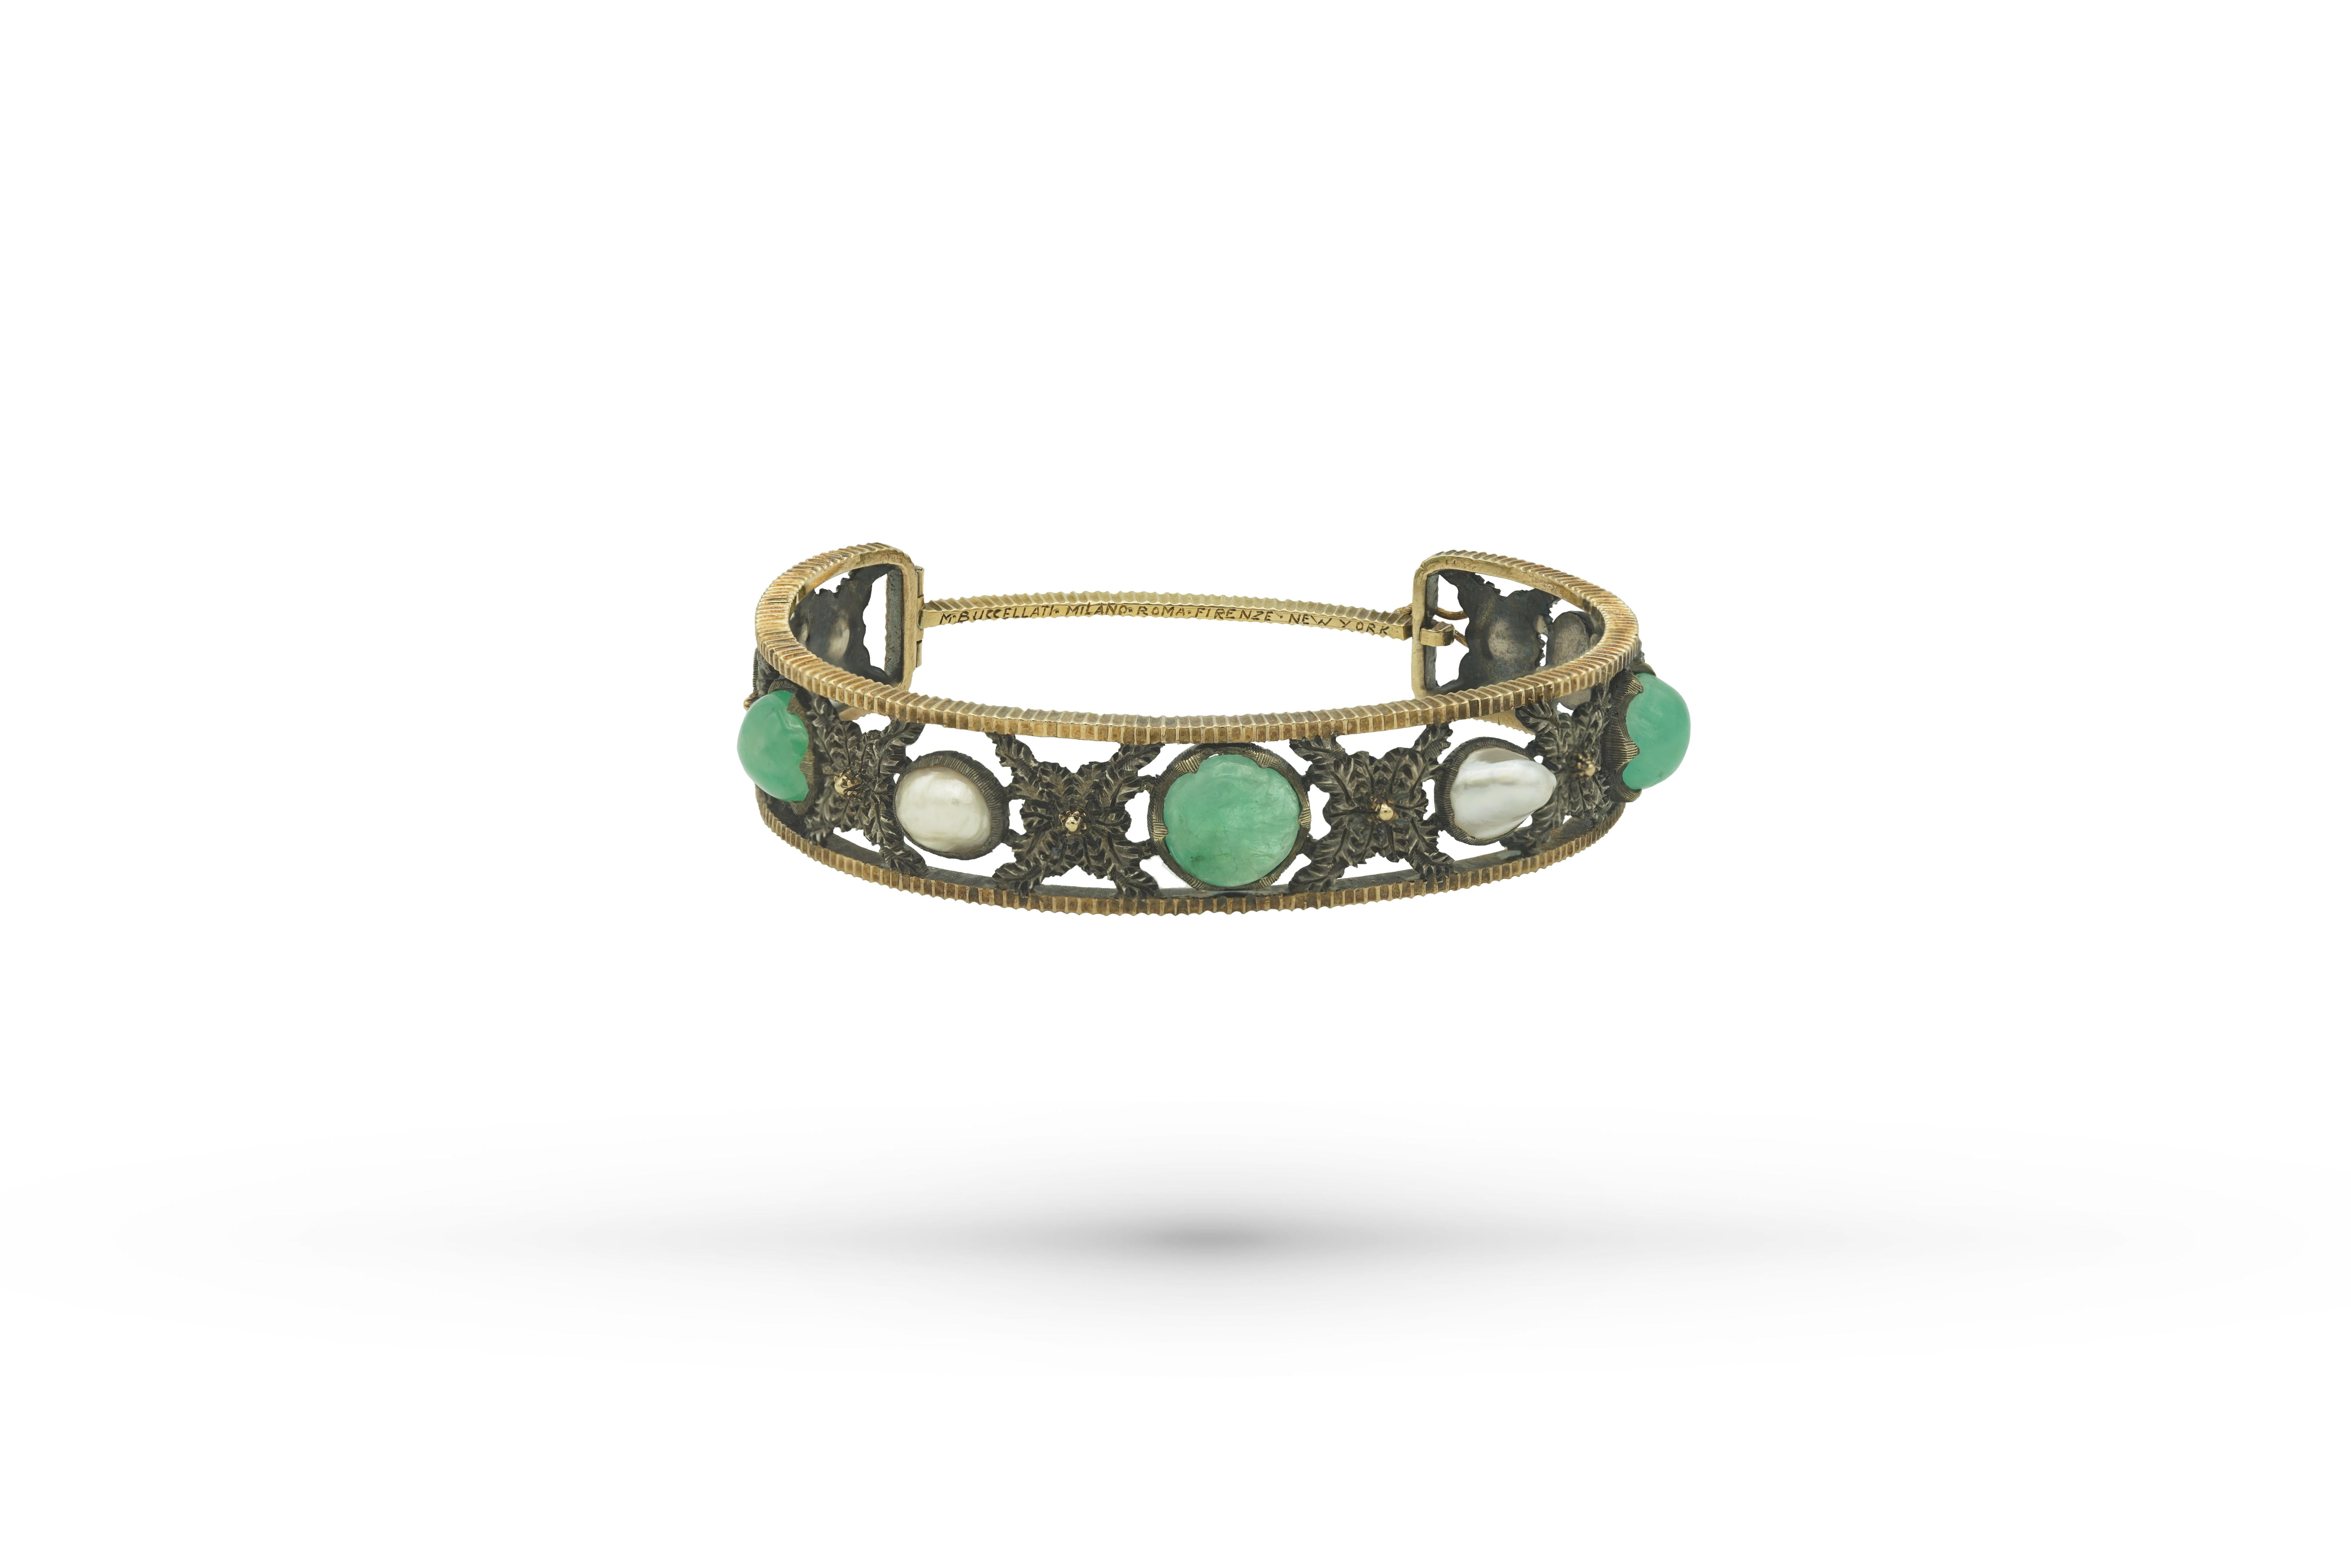 Mario Buccellati Bracelet in yellow gold, silver, set with emeralds and pearls.
Made in 1920. 
22,9 grs